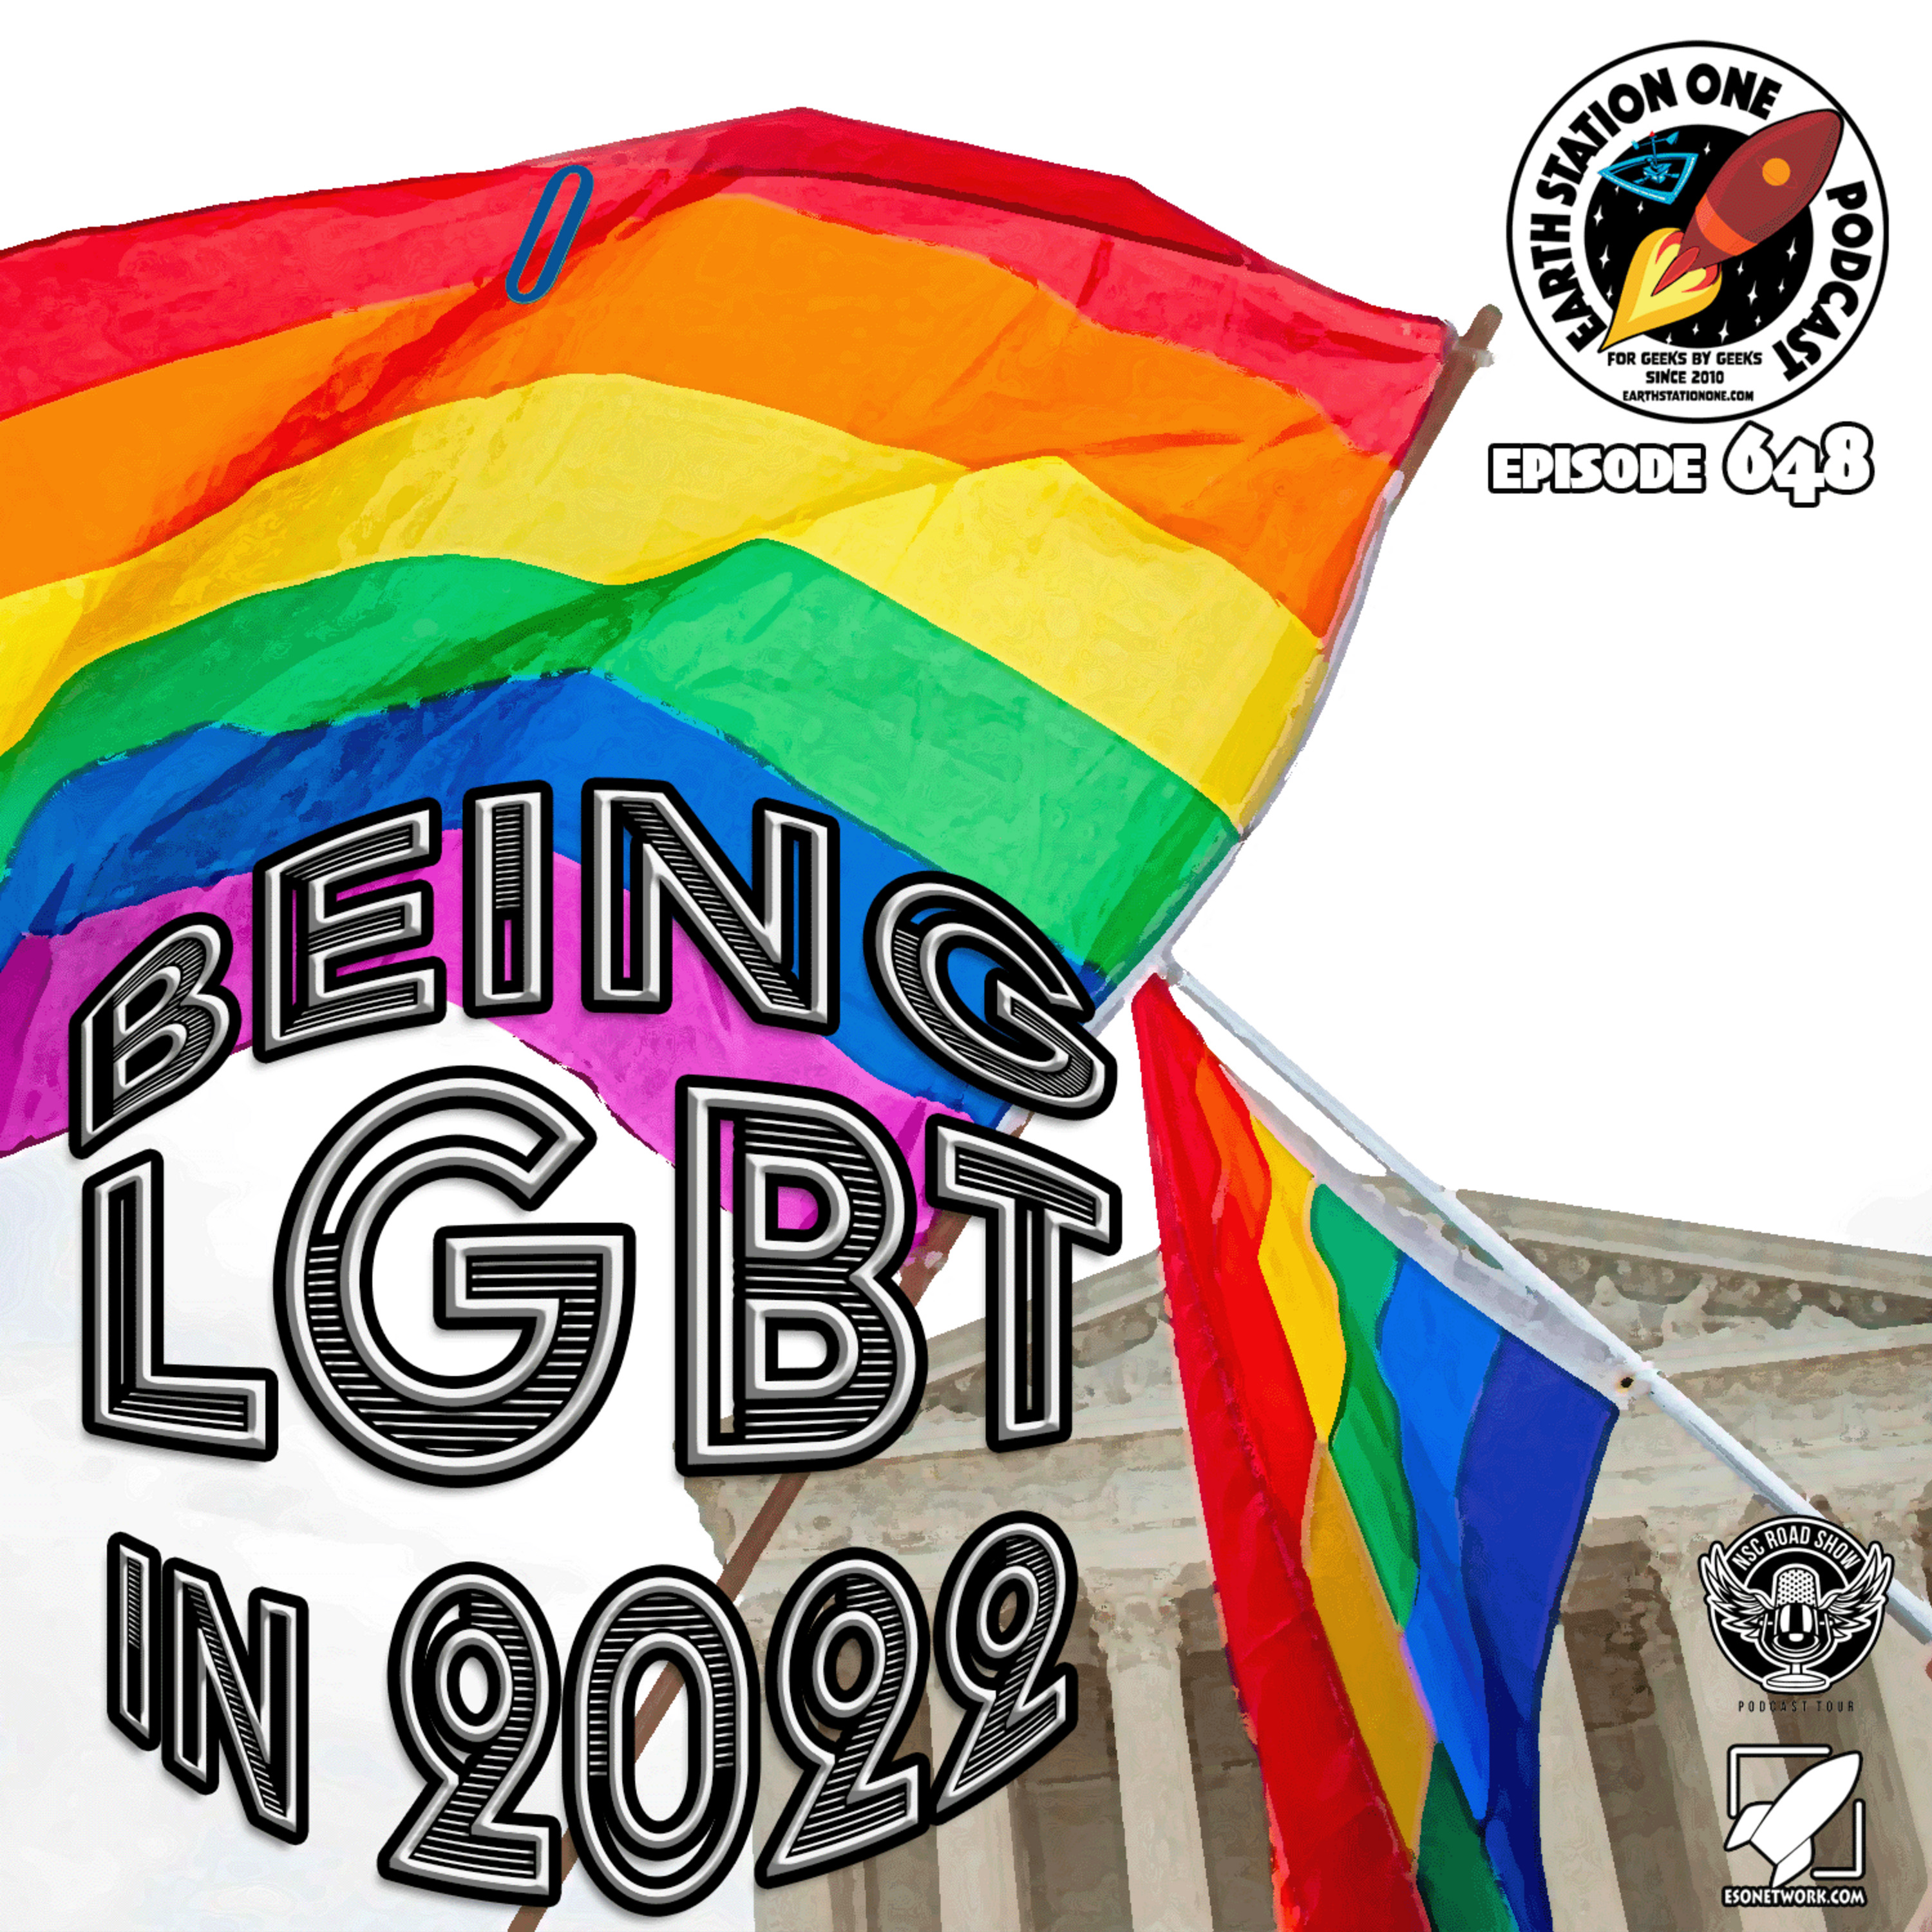 The Earth Station One Podcast - Being LGBT In 2022